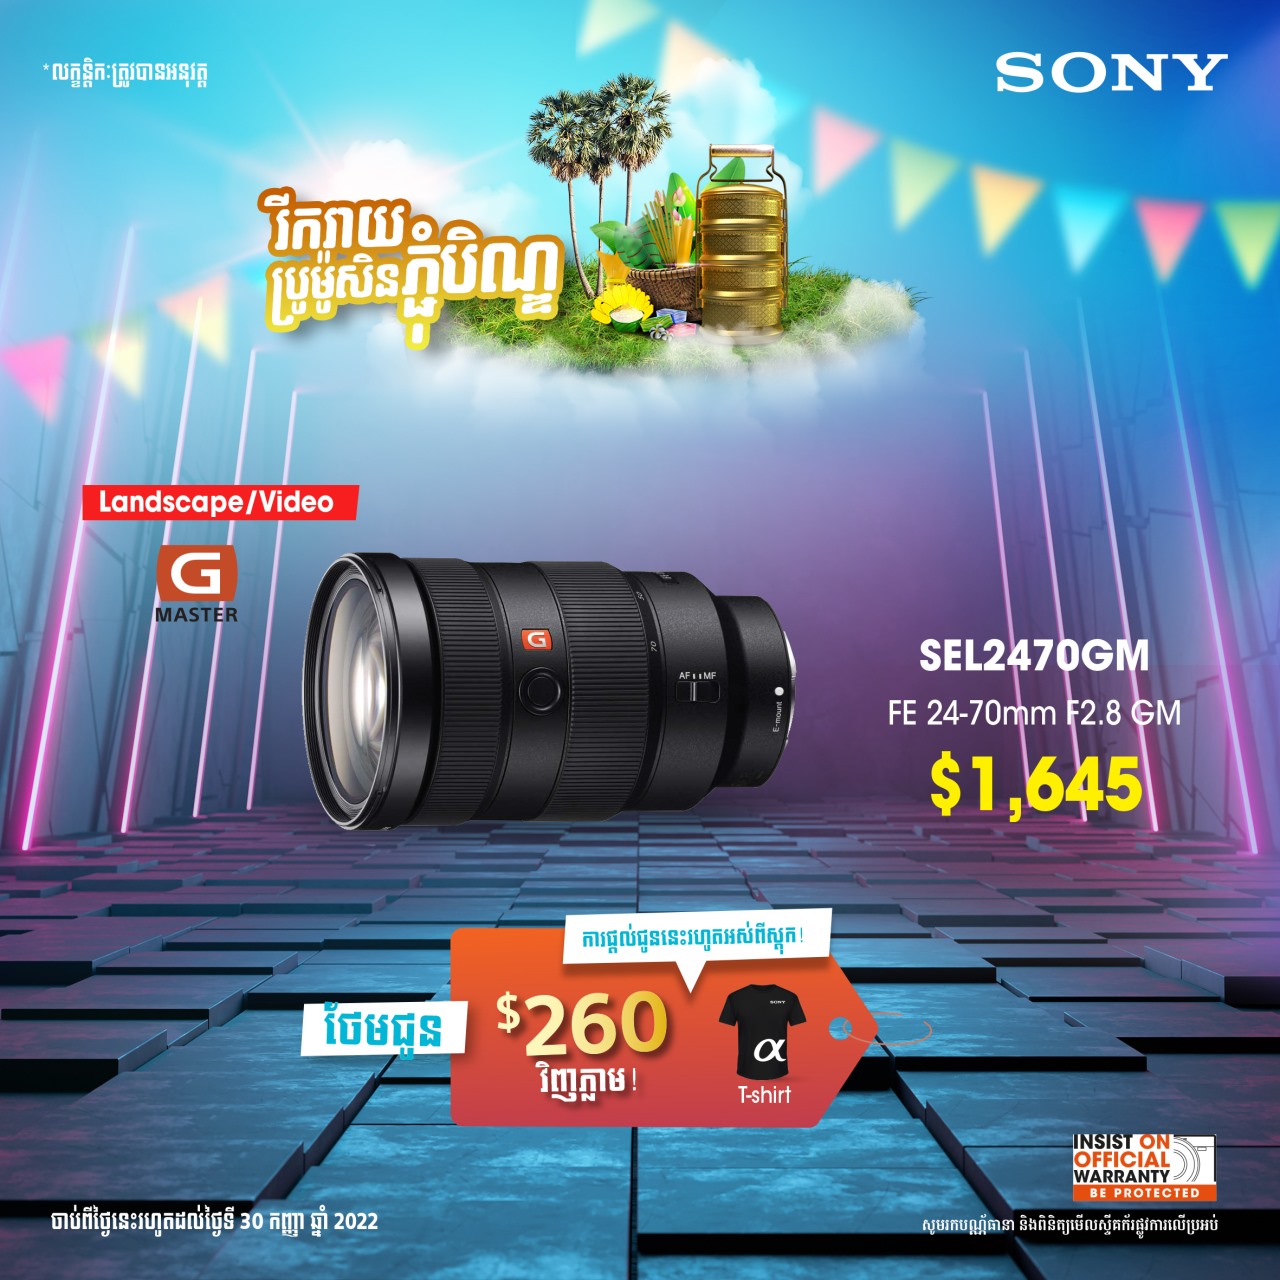 Promotion Phchum Ben for Sony Camera and Lenses 01/09/2022-30/09/2022